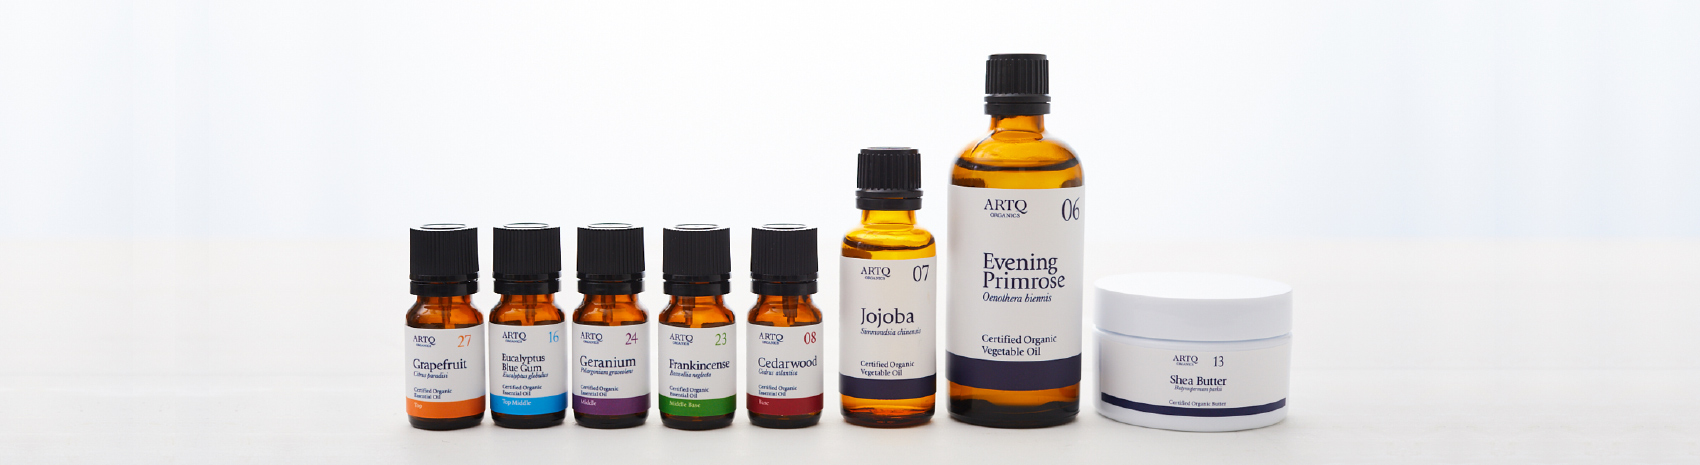 Aromatherapy | Products